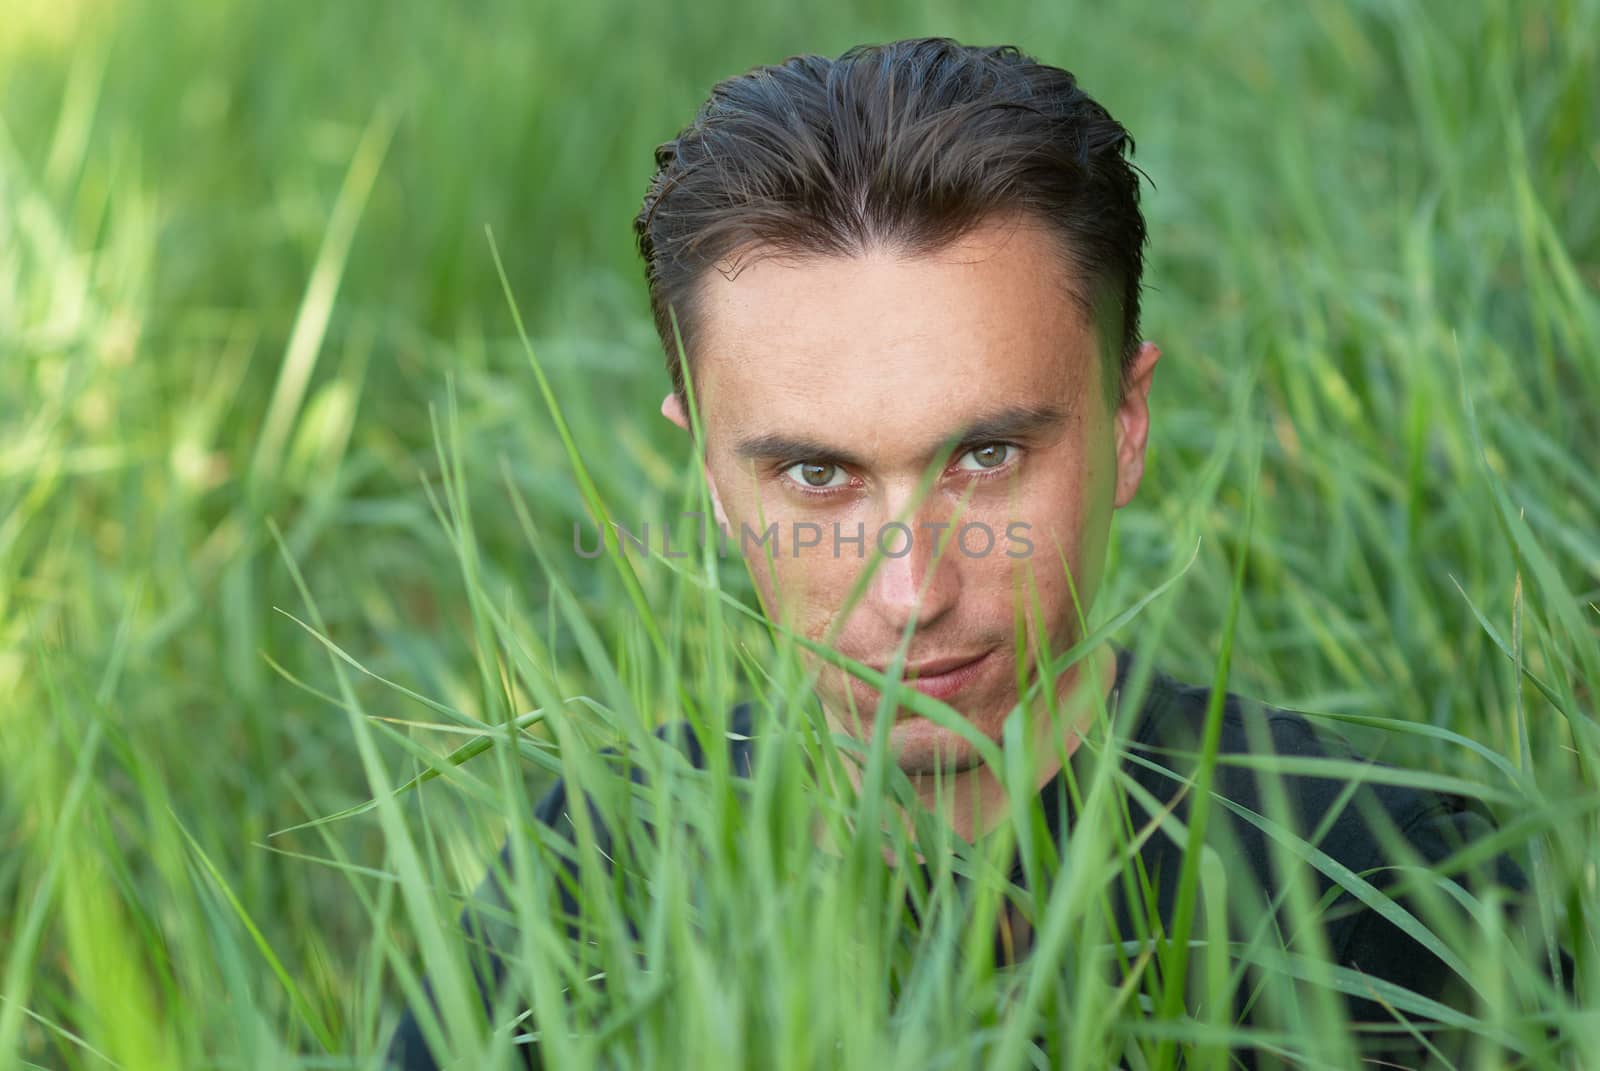 Man's portrait in the green grass background